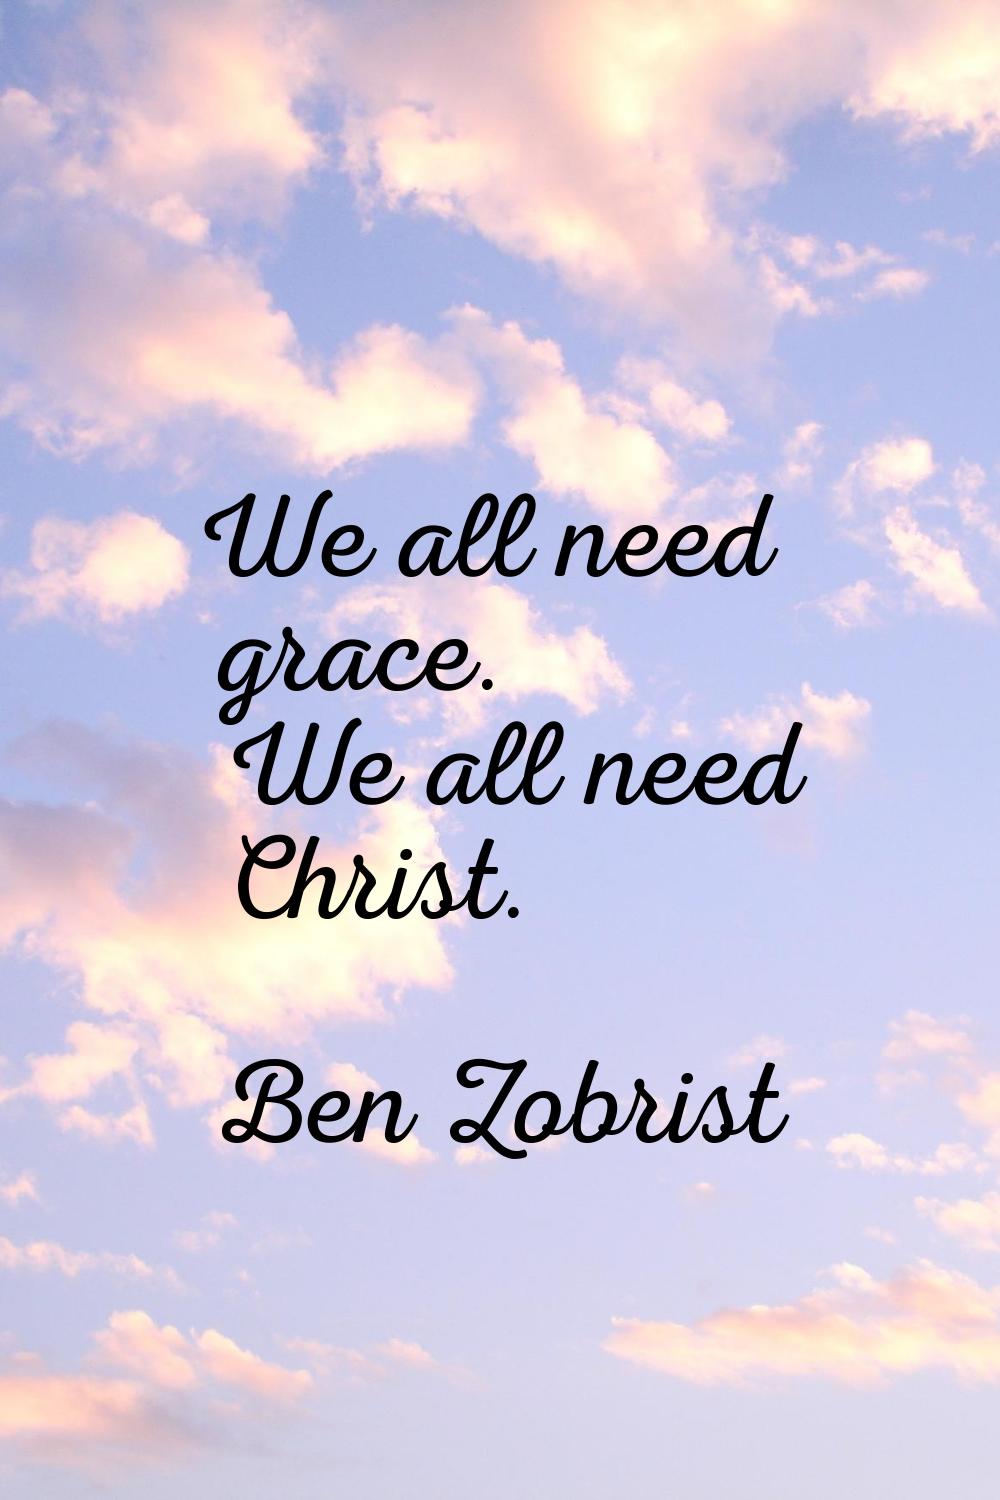 We all need grace. We all need Christ.